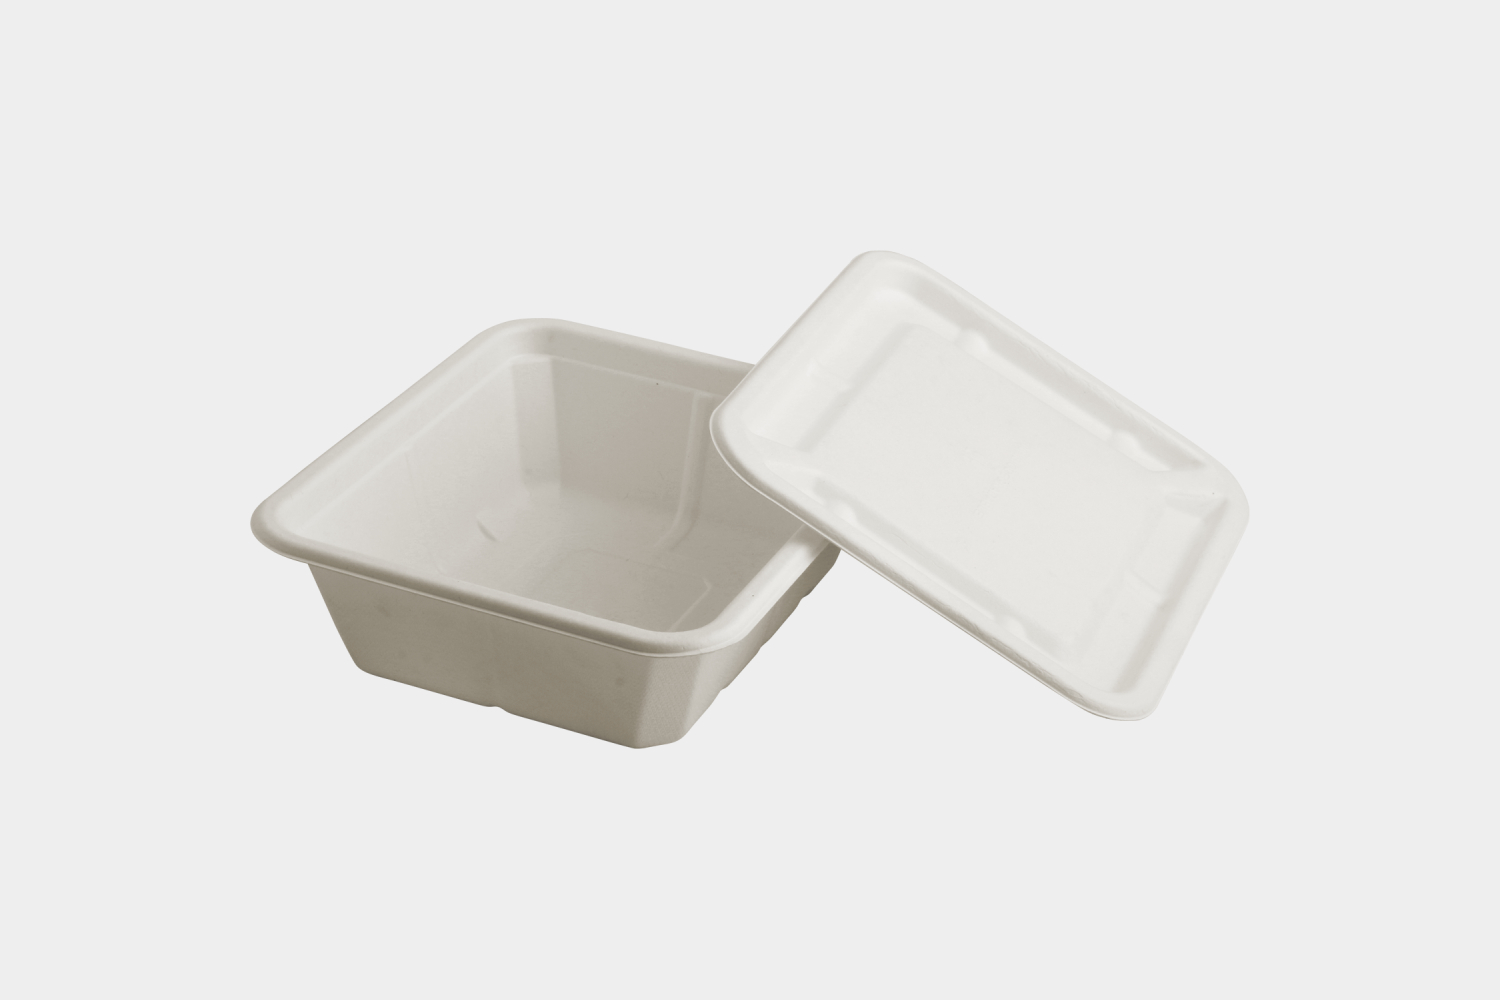 Small Biodegradable Food Container with Lid Front View - Ecolates